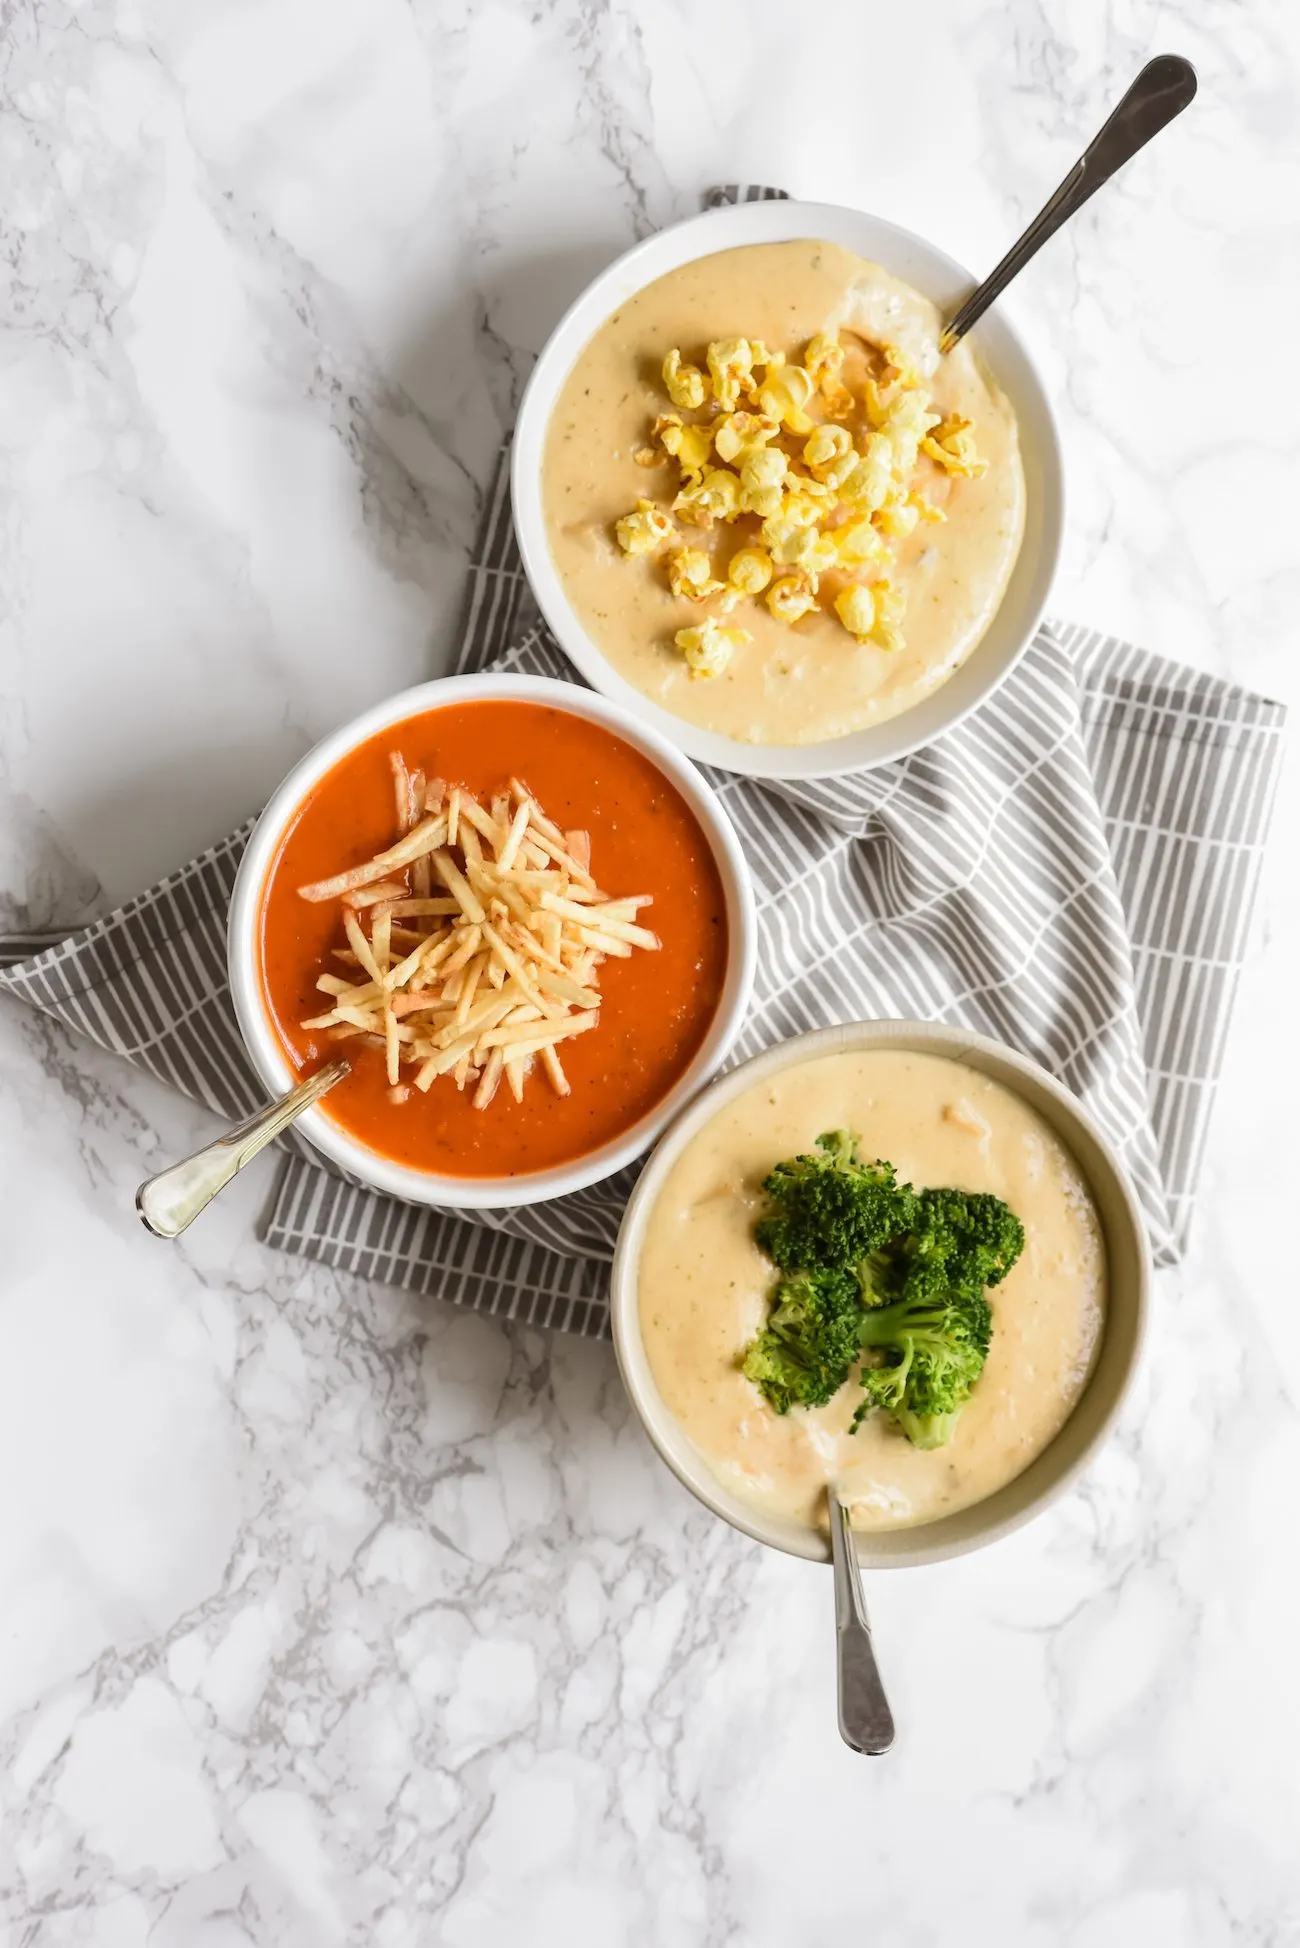 9 Seriously Scrumptious Soup Toppings | Entertaining ideas, hostess tips, party recipes, dinner party ideas and more from @cydconverse